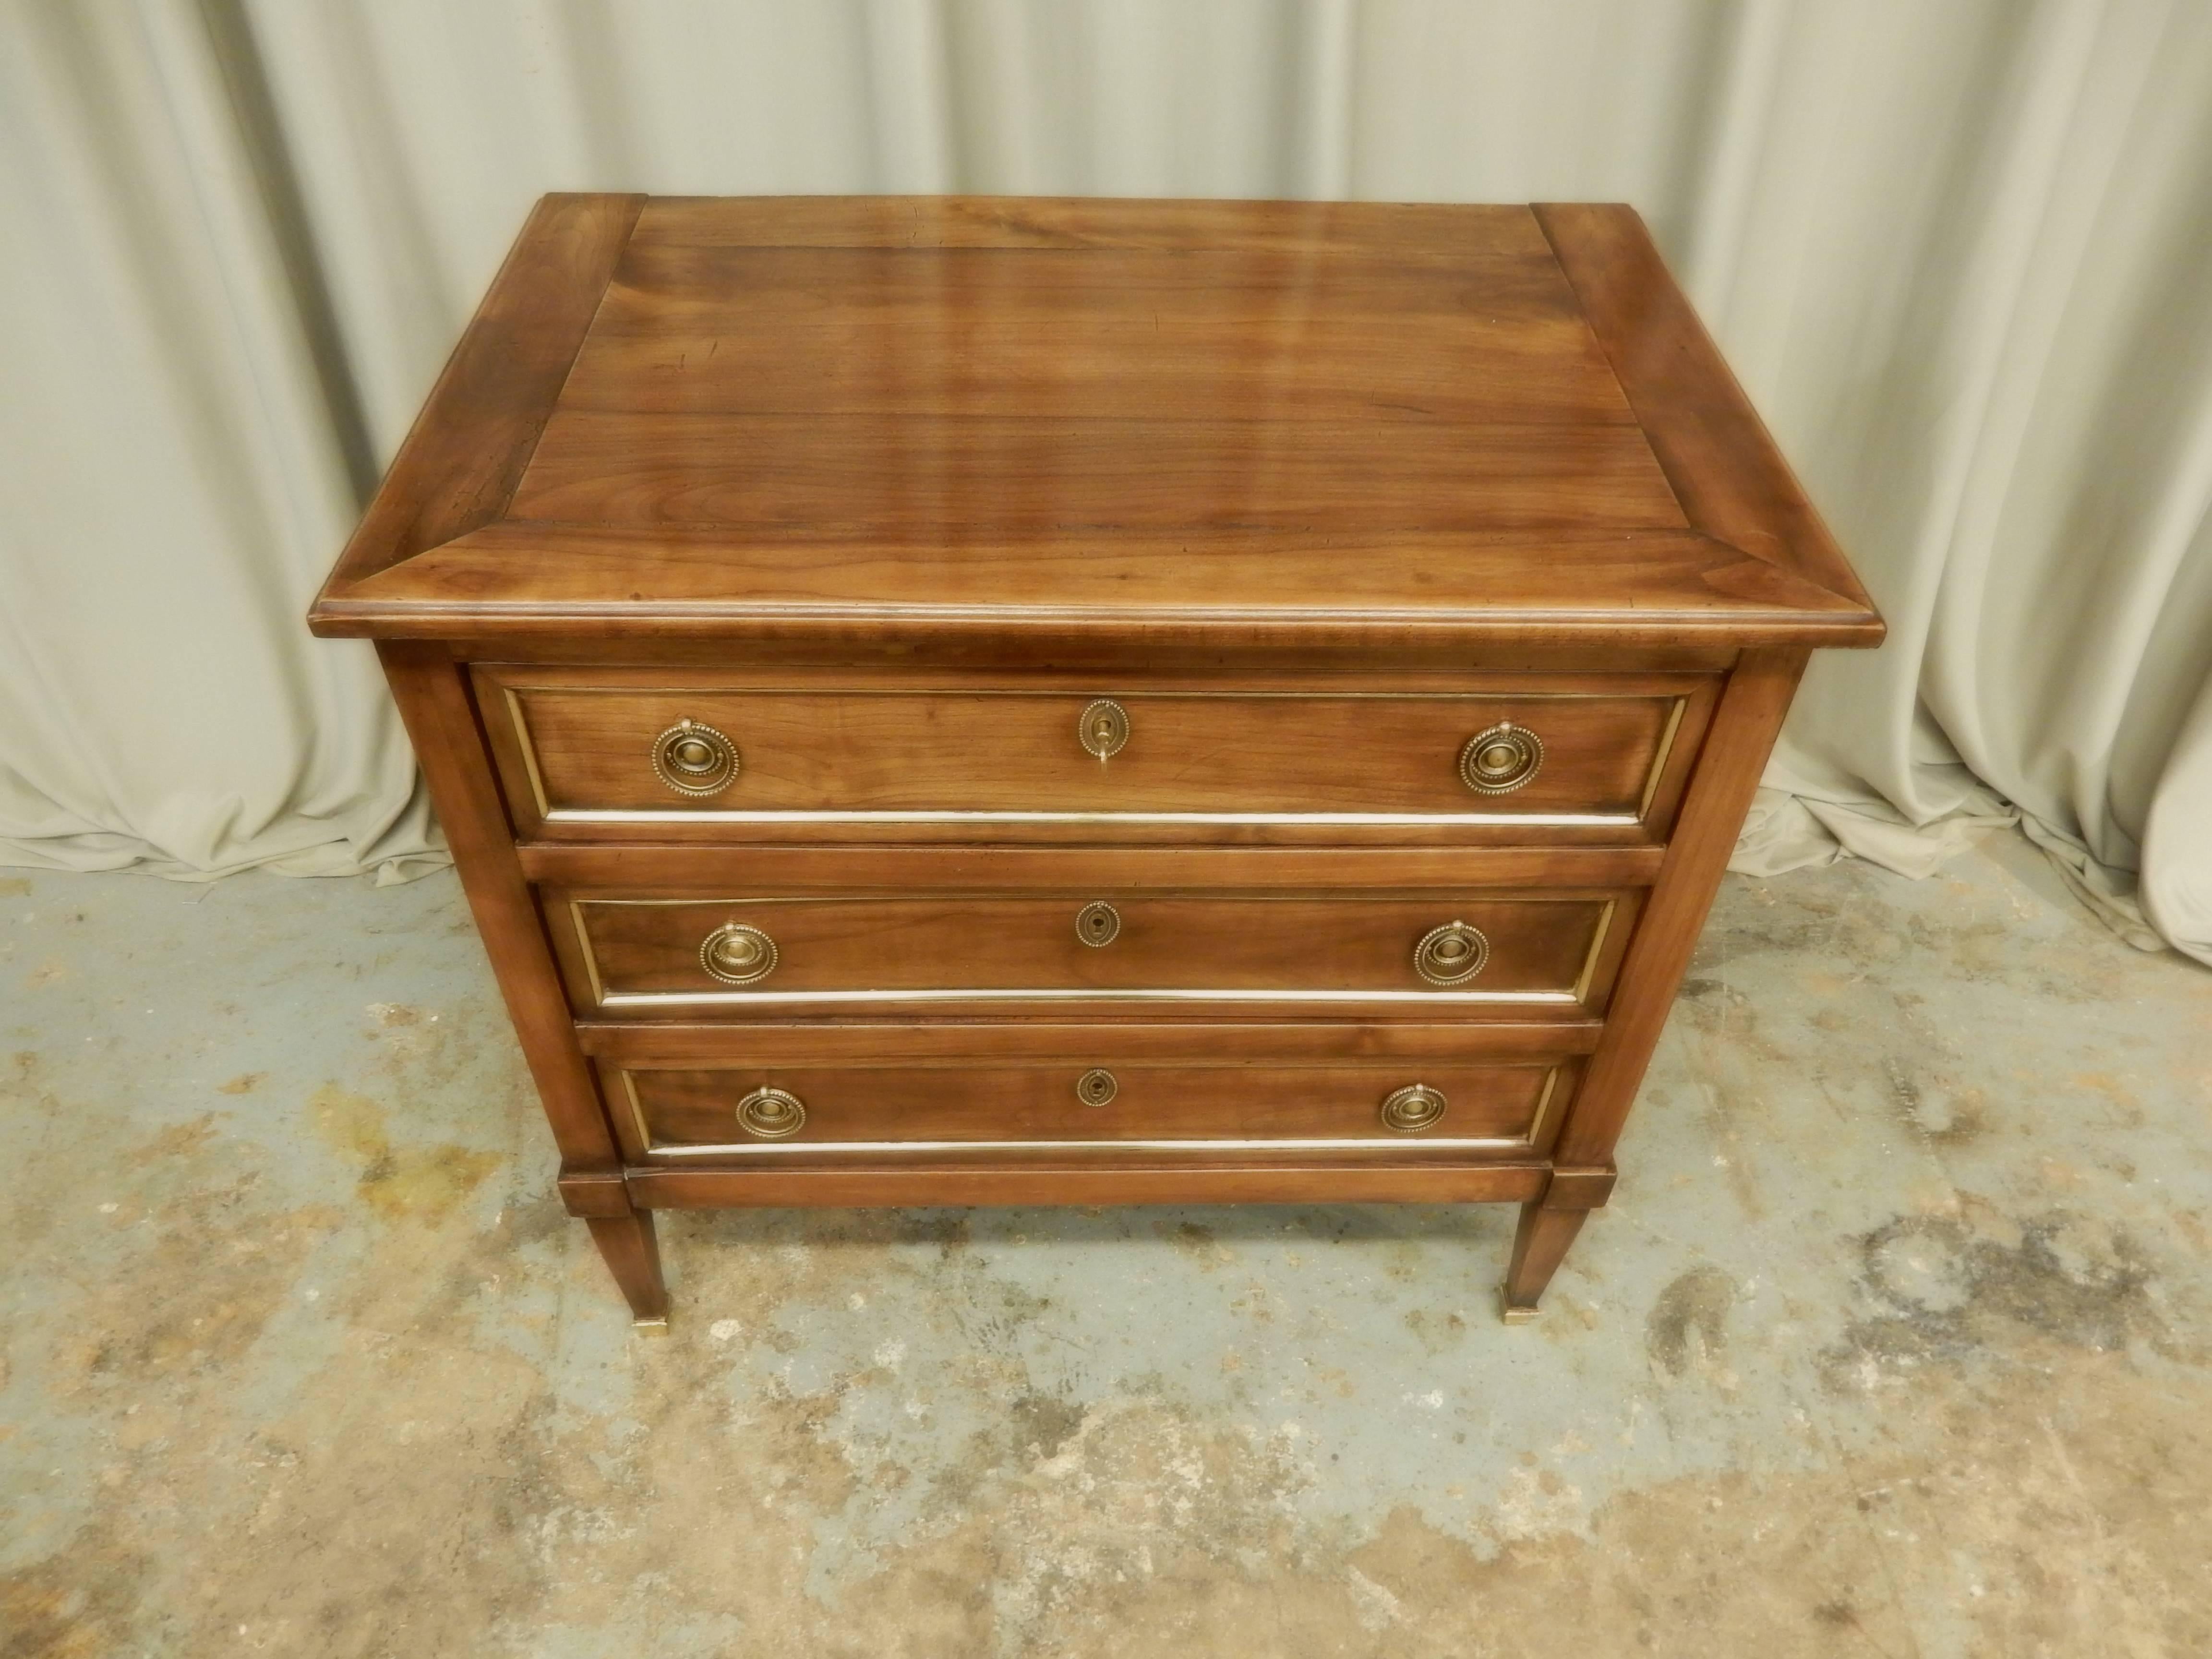 Small brass trimmed three-drawer French Louis XVI walnut 19th century commode.